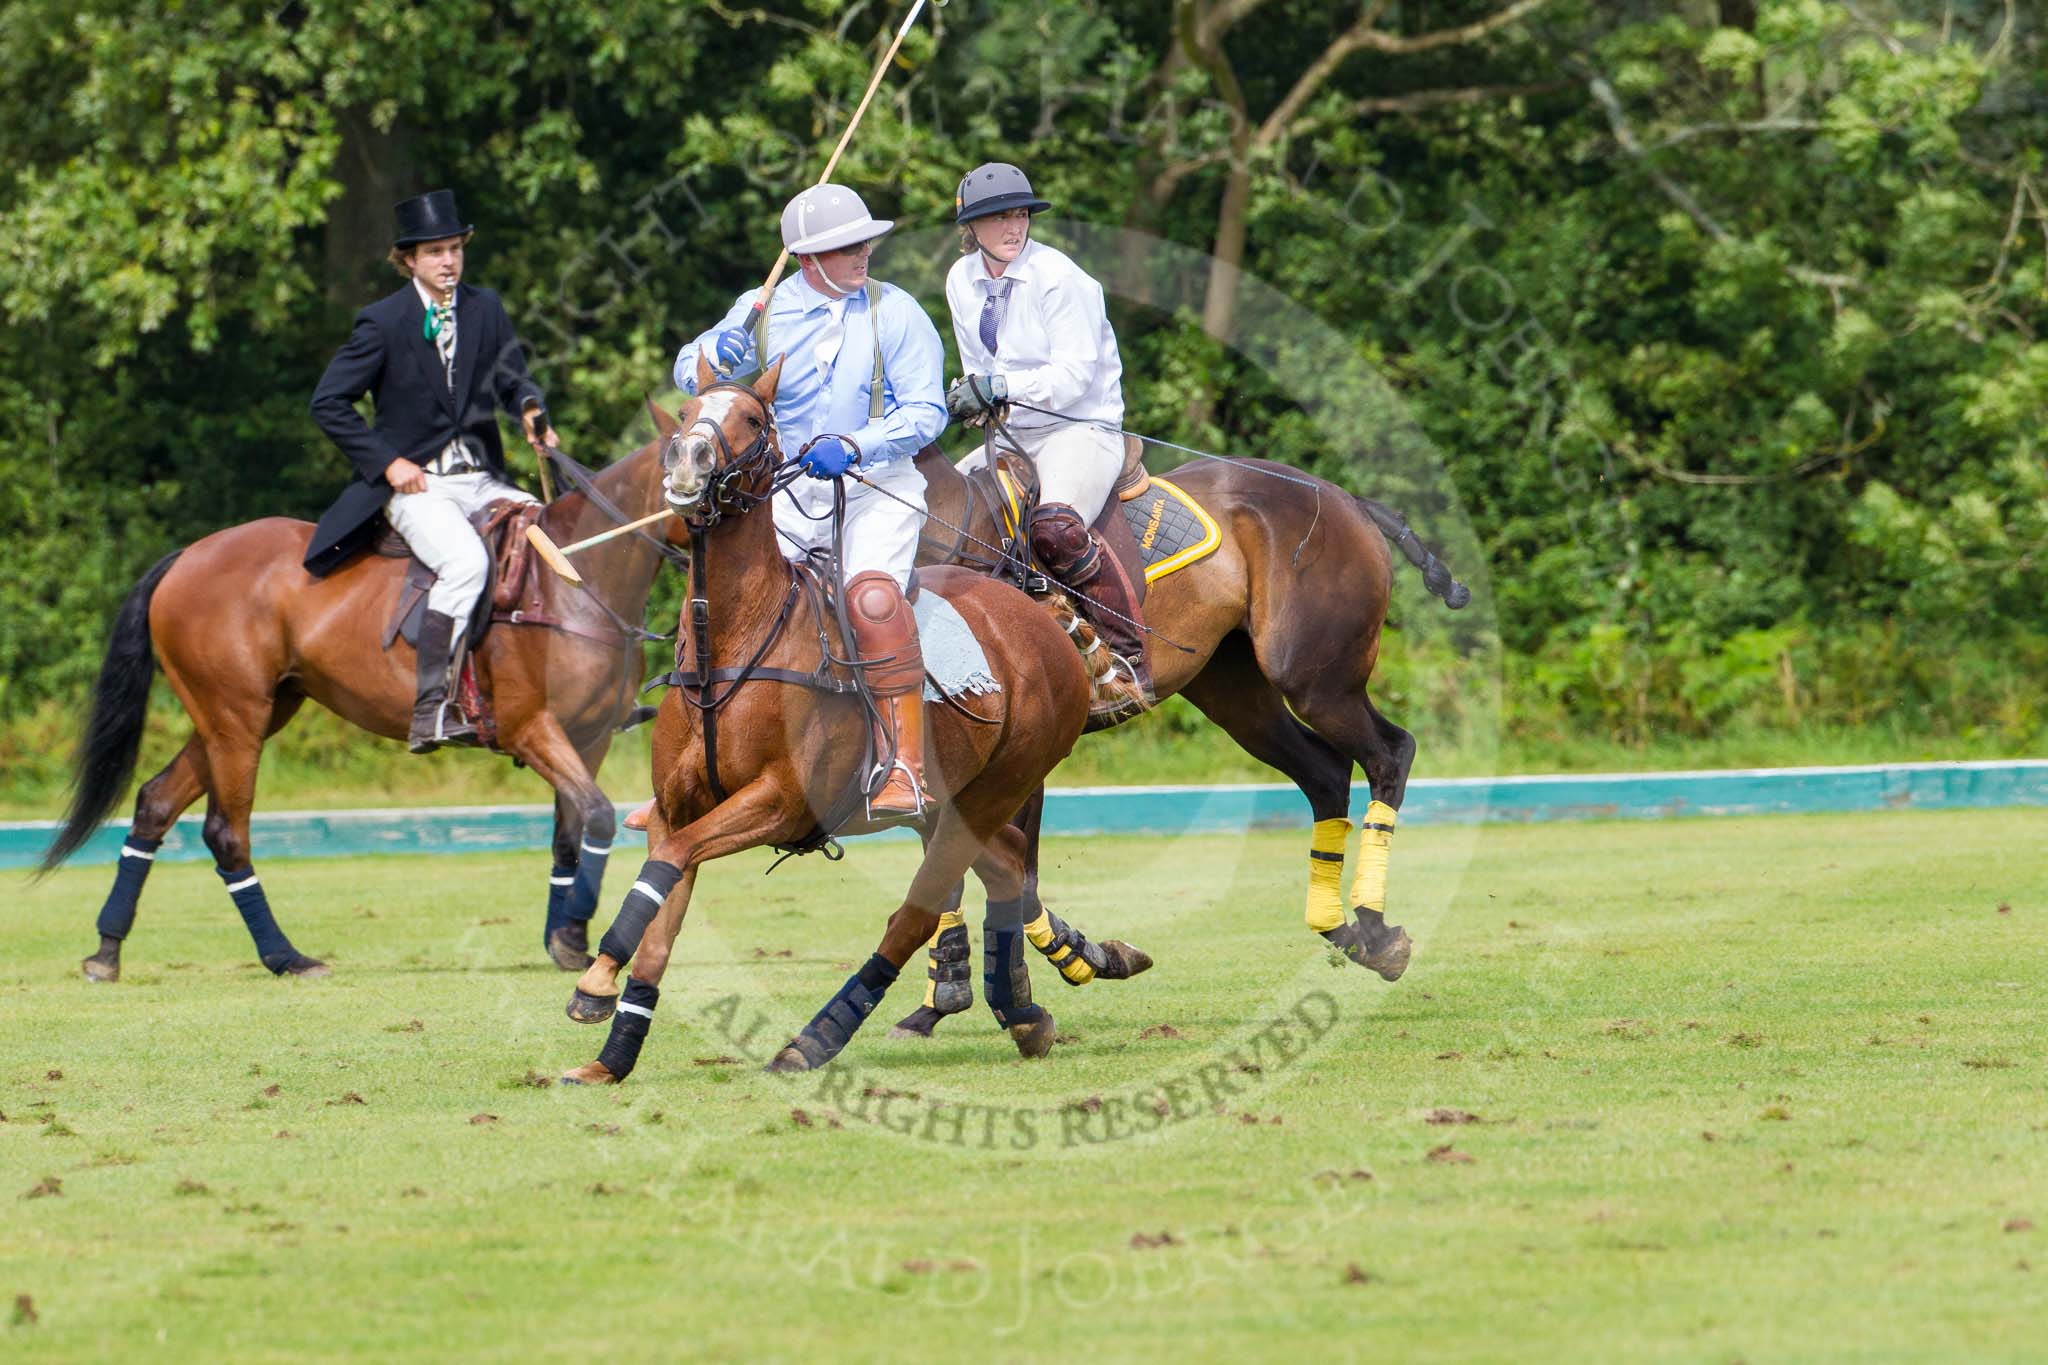 7th Heritage Polo Cup semi-finals: La Mariposa Argentina, Timothy Rose looking around..
Hurtwood Park Polo Club,
Ewhurst Green,
Surrey,
United Kingdom,
on 04 August 2012 at 16:15, image #321